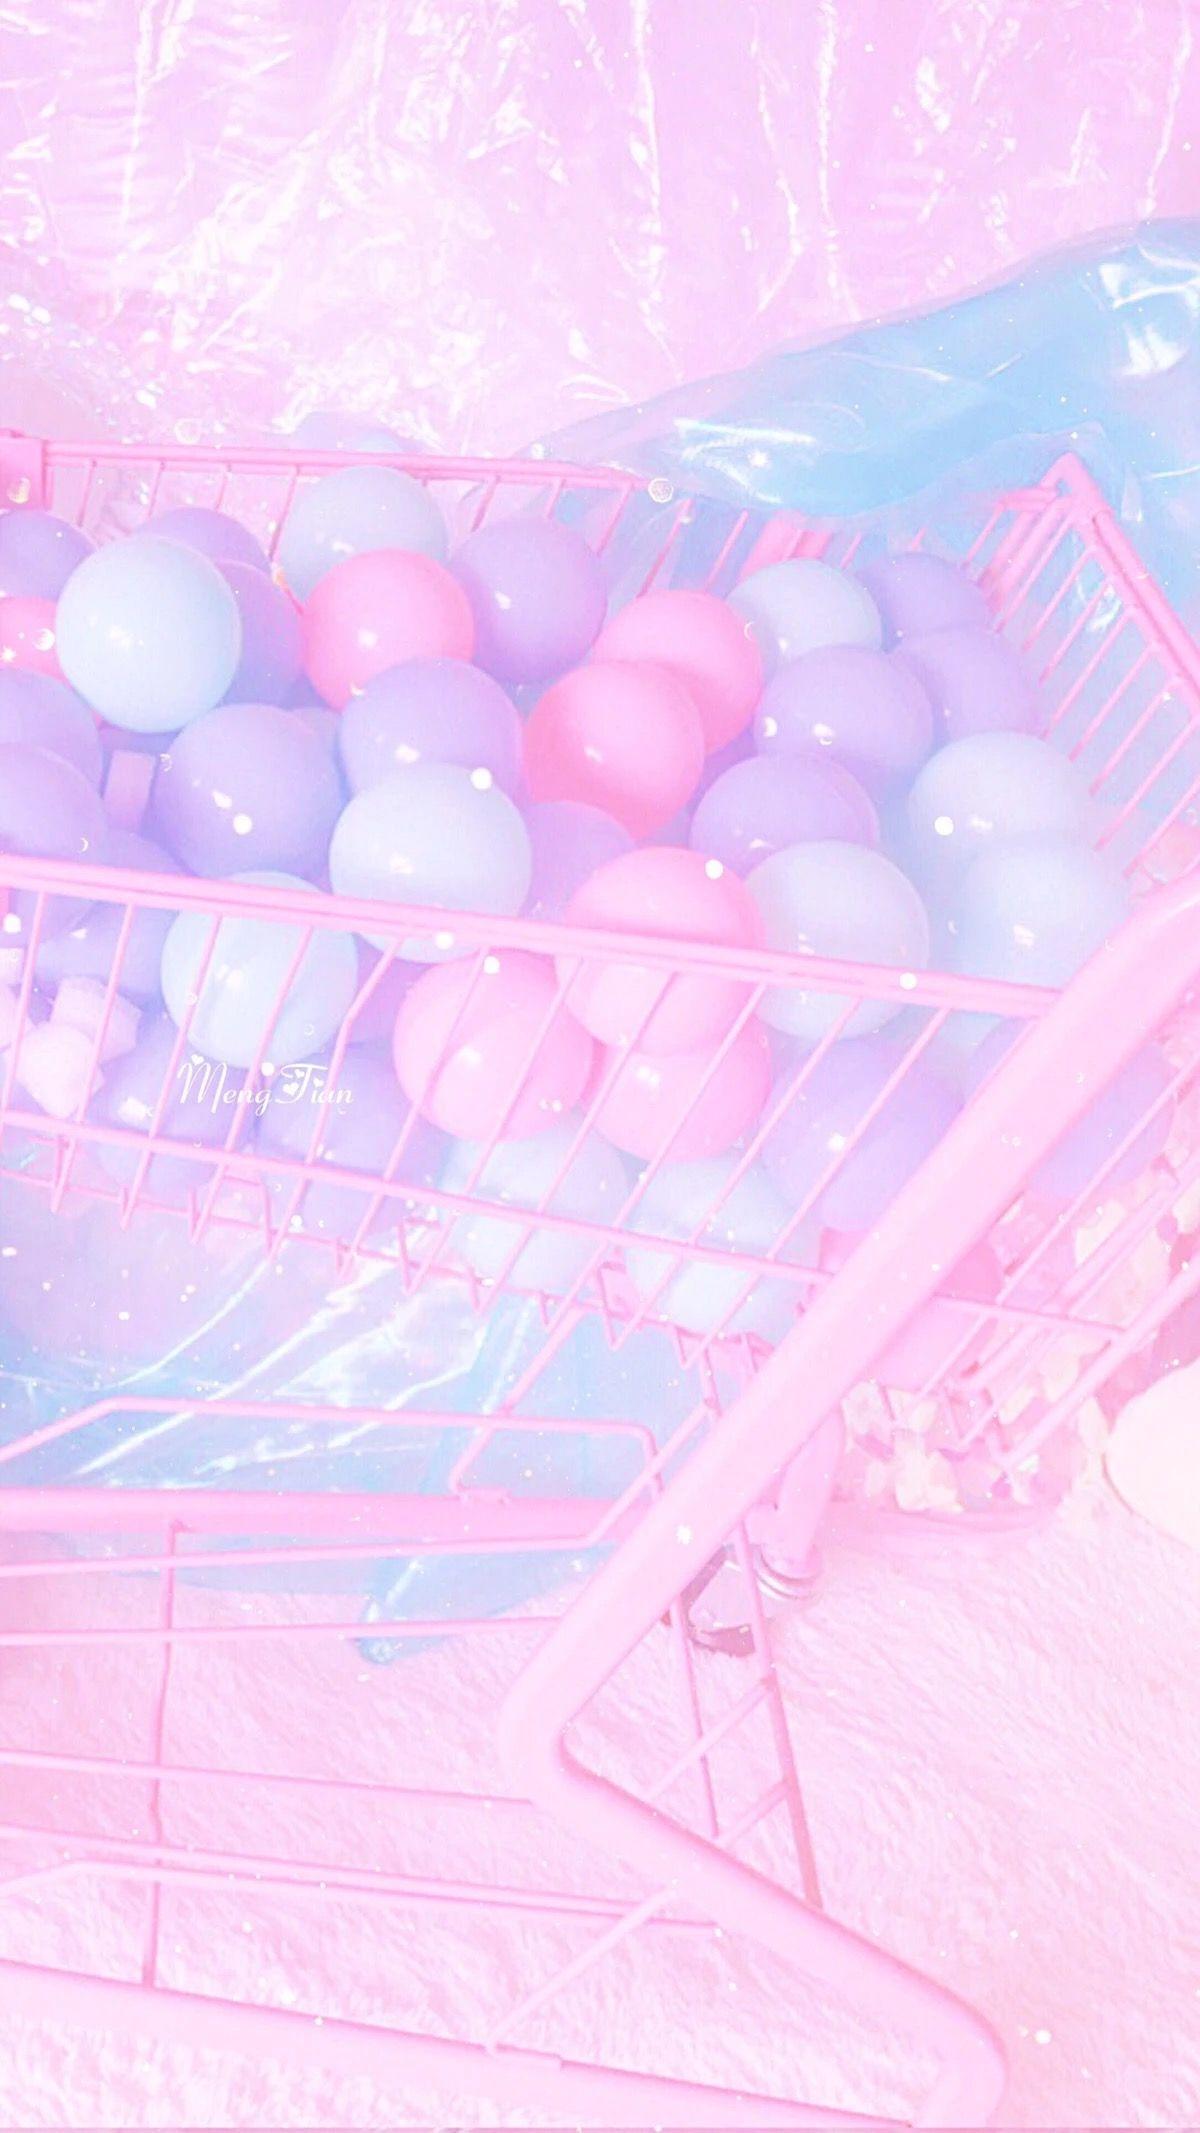 A pink basket with balloons in it - Pink, cute pink, pastel pink, pastel, birthday, pink anime, HD, pink phone